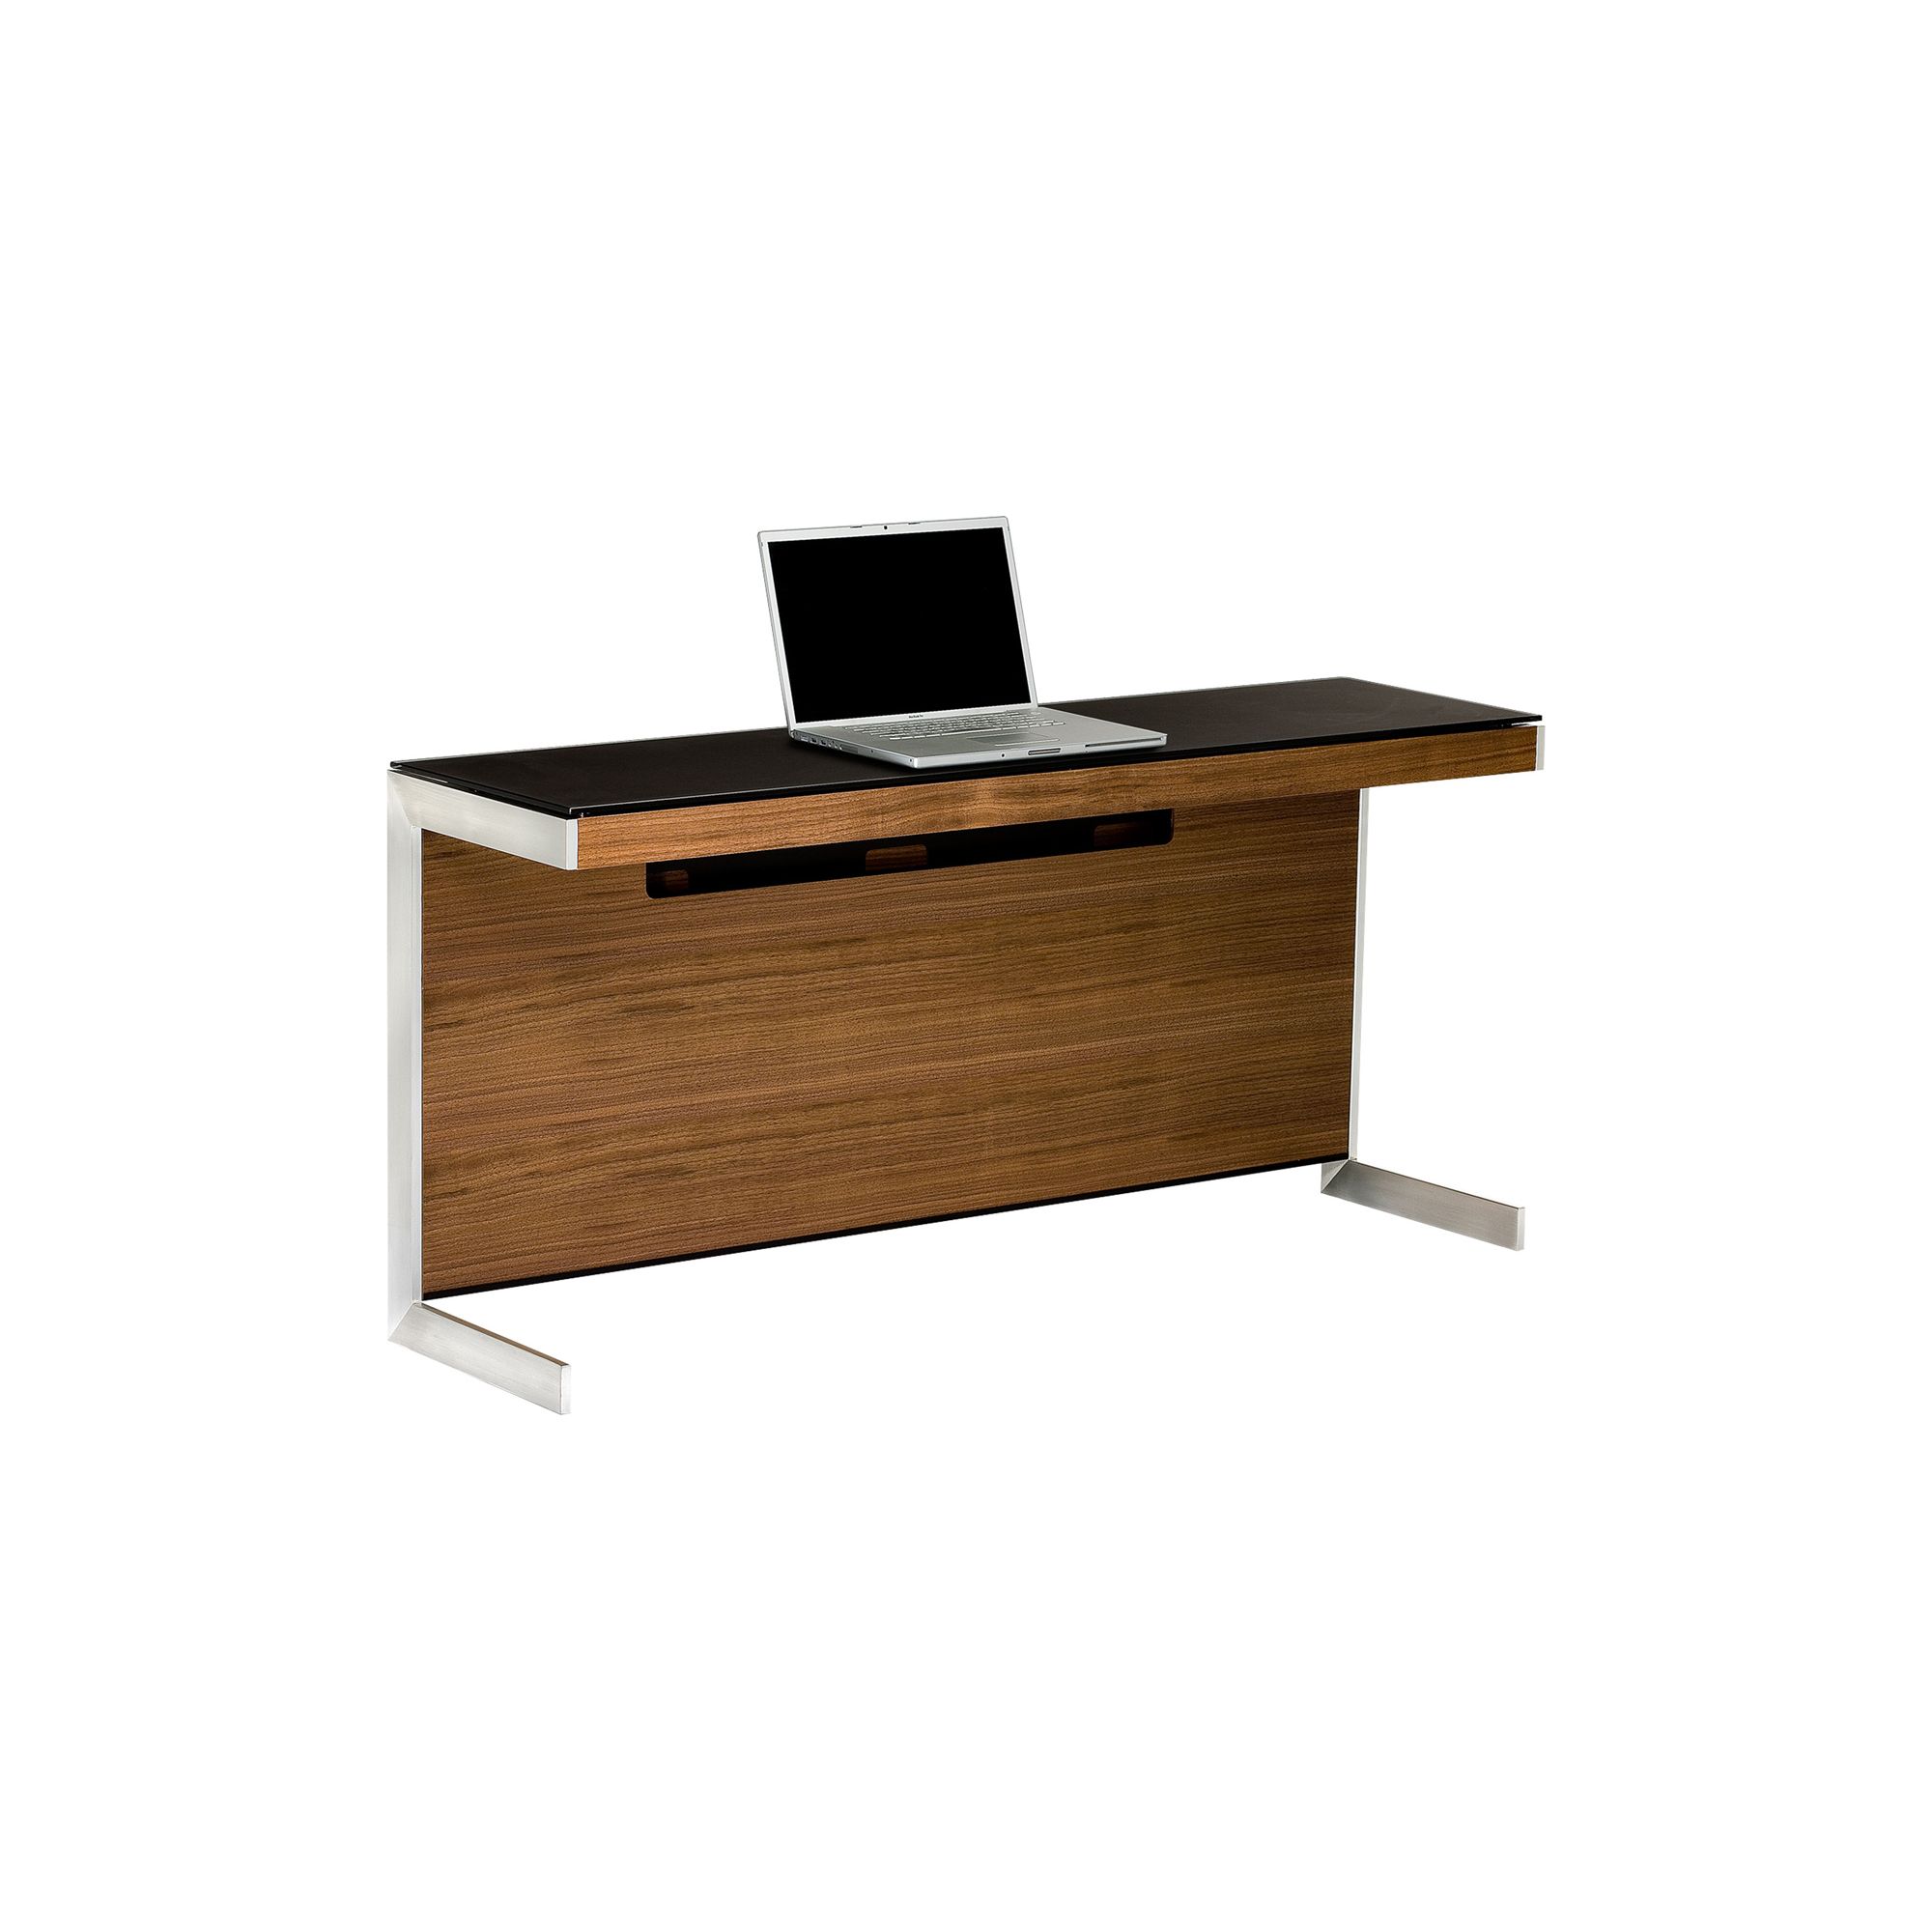 Sequel 6002 Desk in Natural Walnut with Glass Top at Tesco Direct